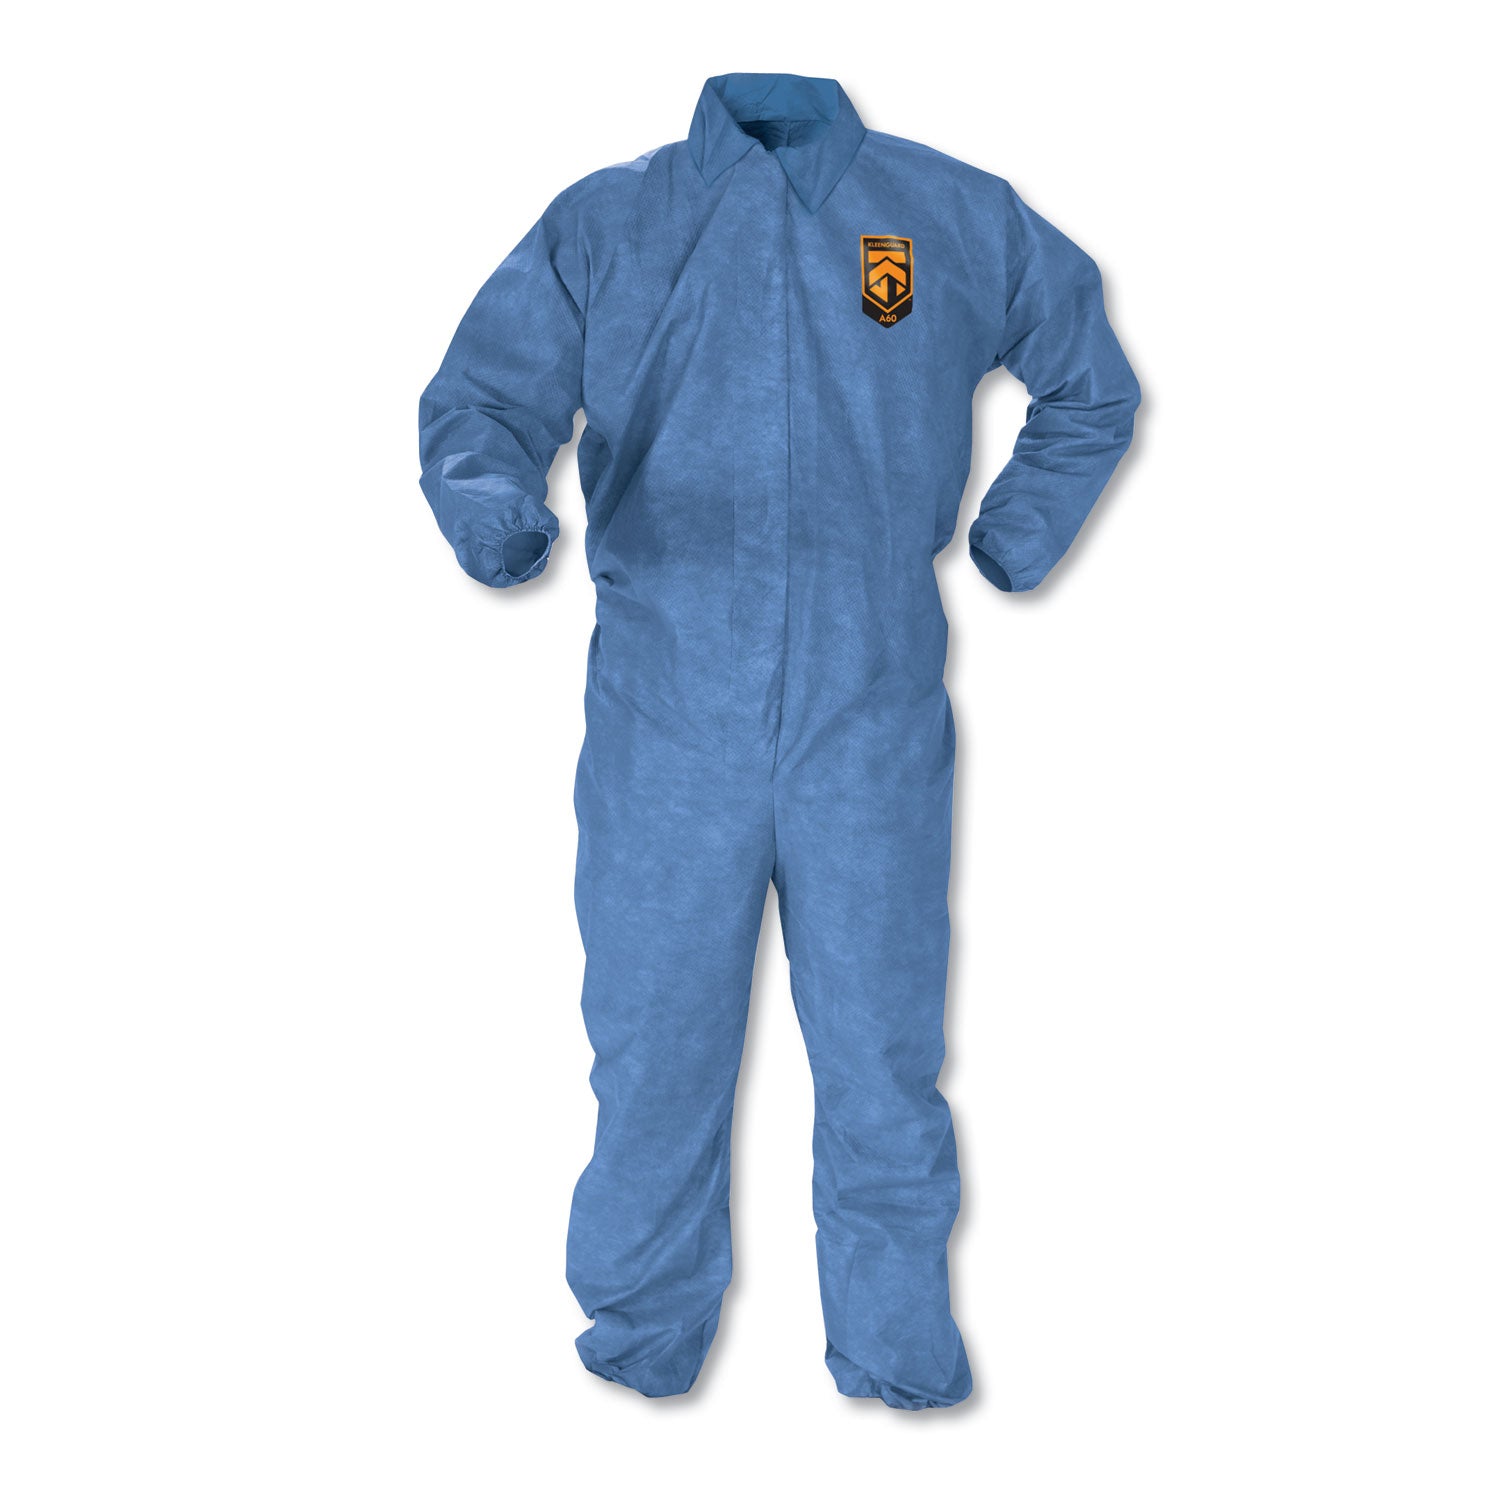 a60-elastic-cuff-ankle-and-back-coveralls-2x-large-blue-24-carton_kcc45005 - 1